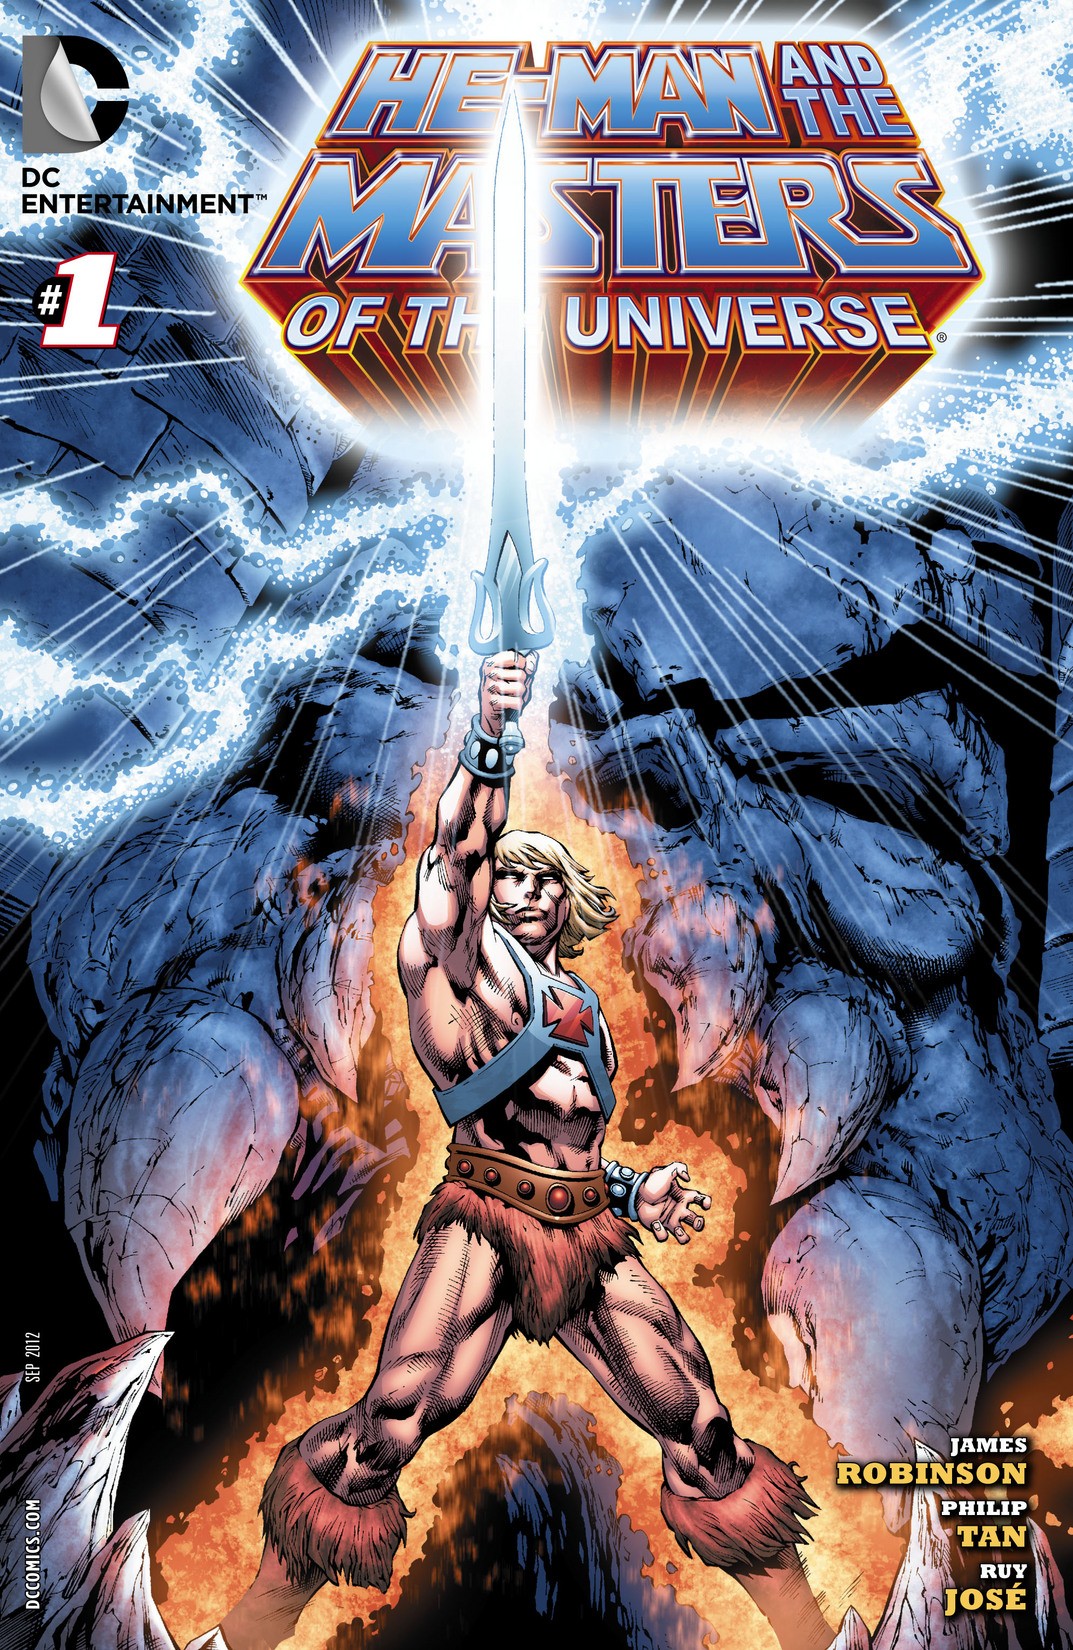 He-Man and the Masters of the Universe Vol. 1 #1